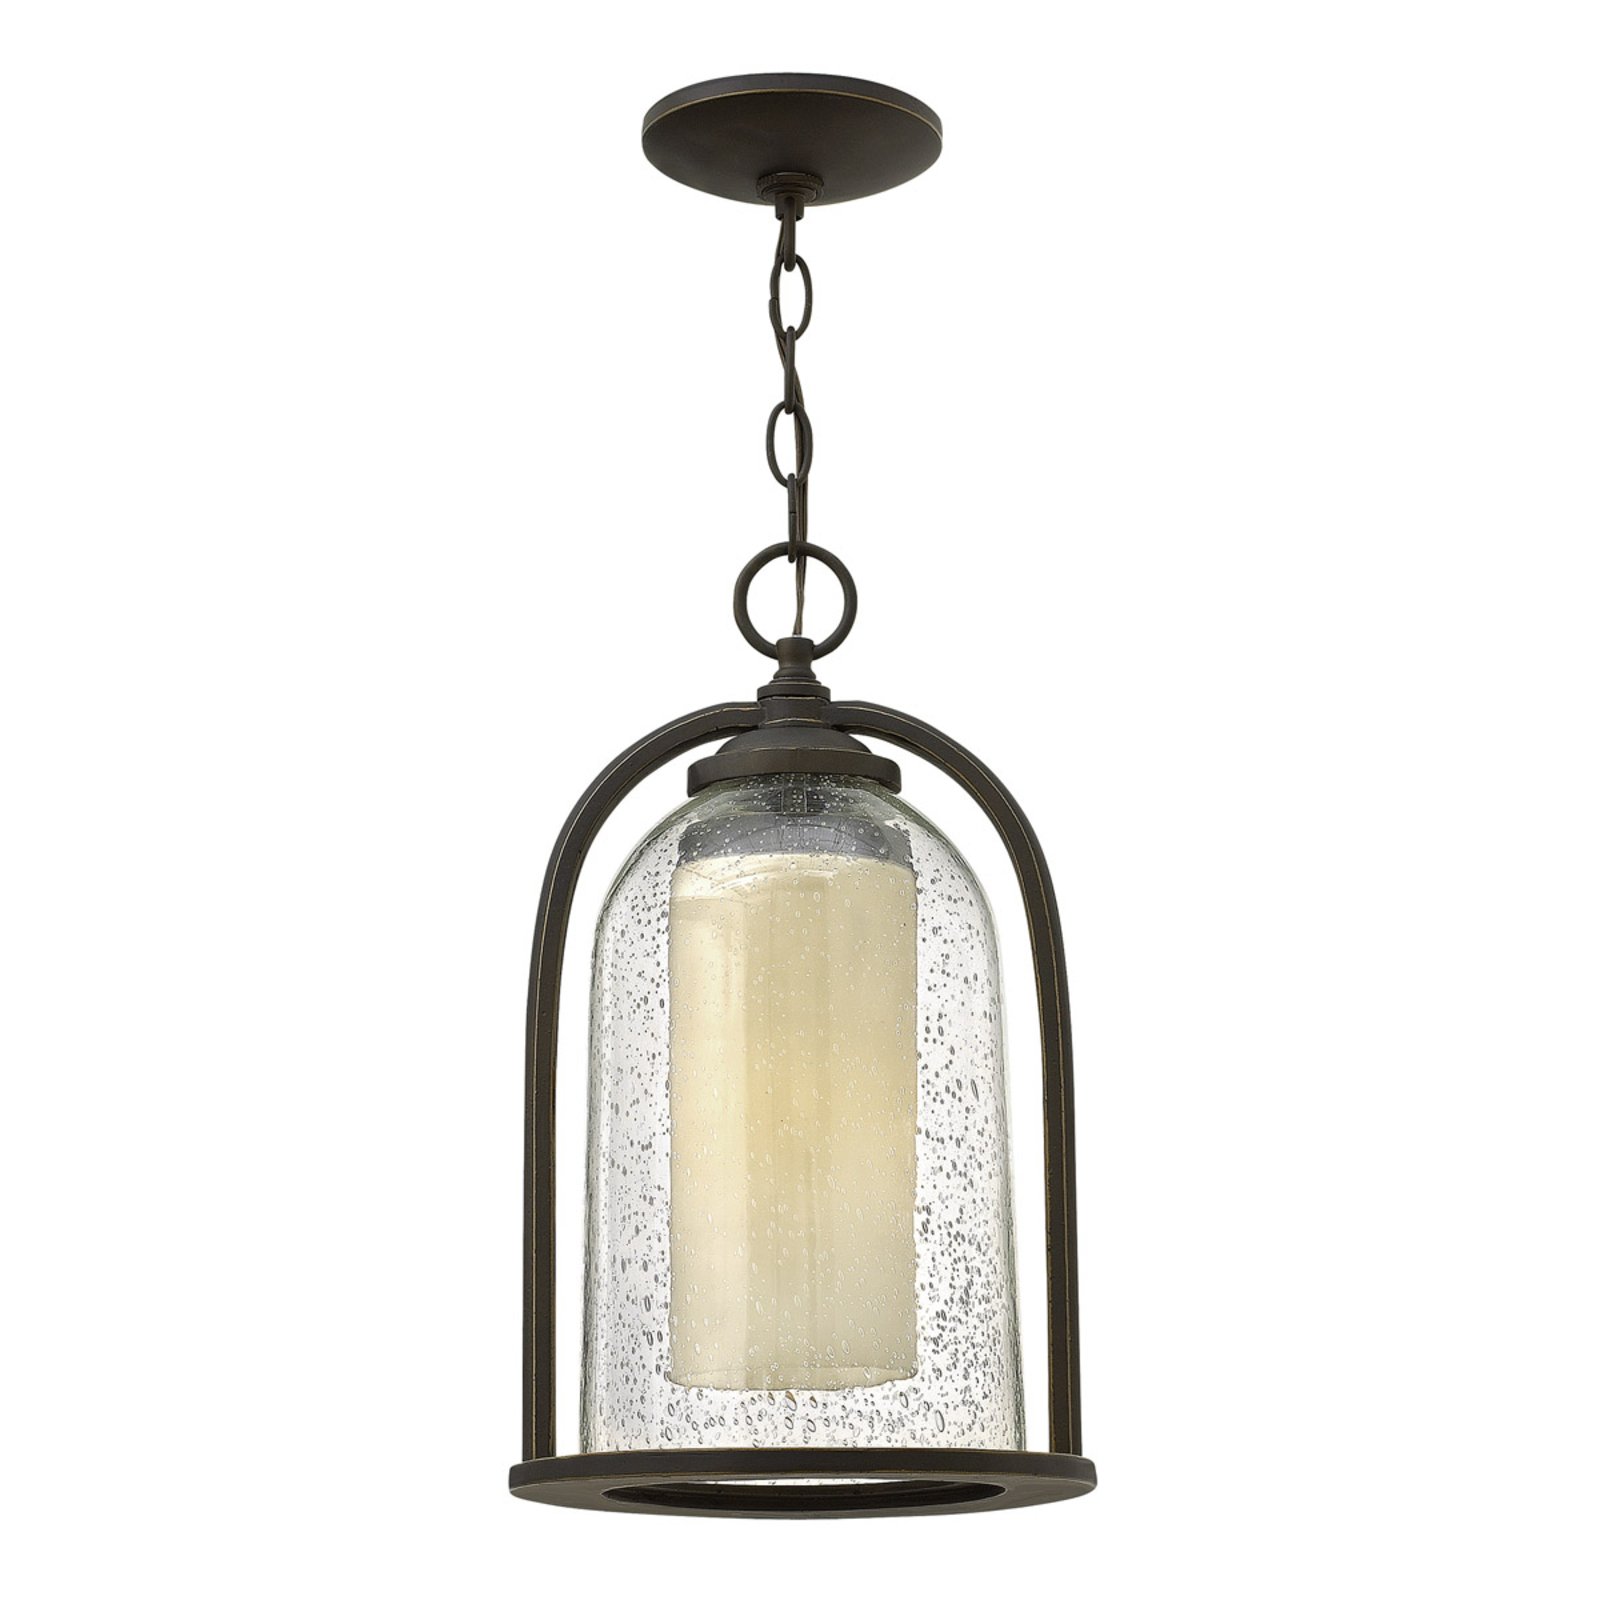 Double-shaded hanging lamp Quincy for outdoors